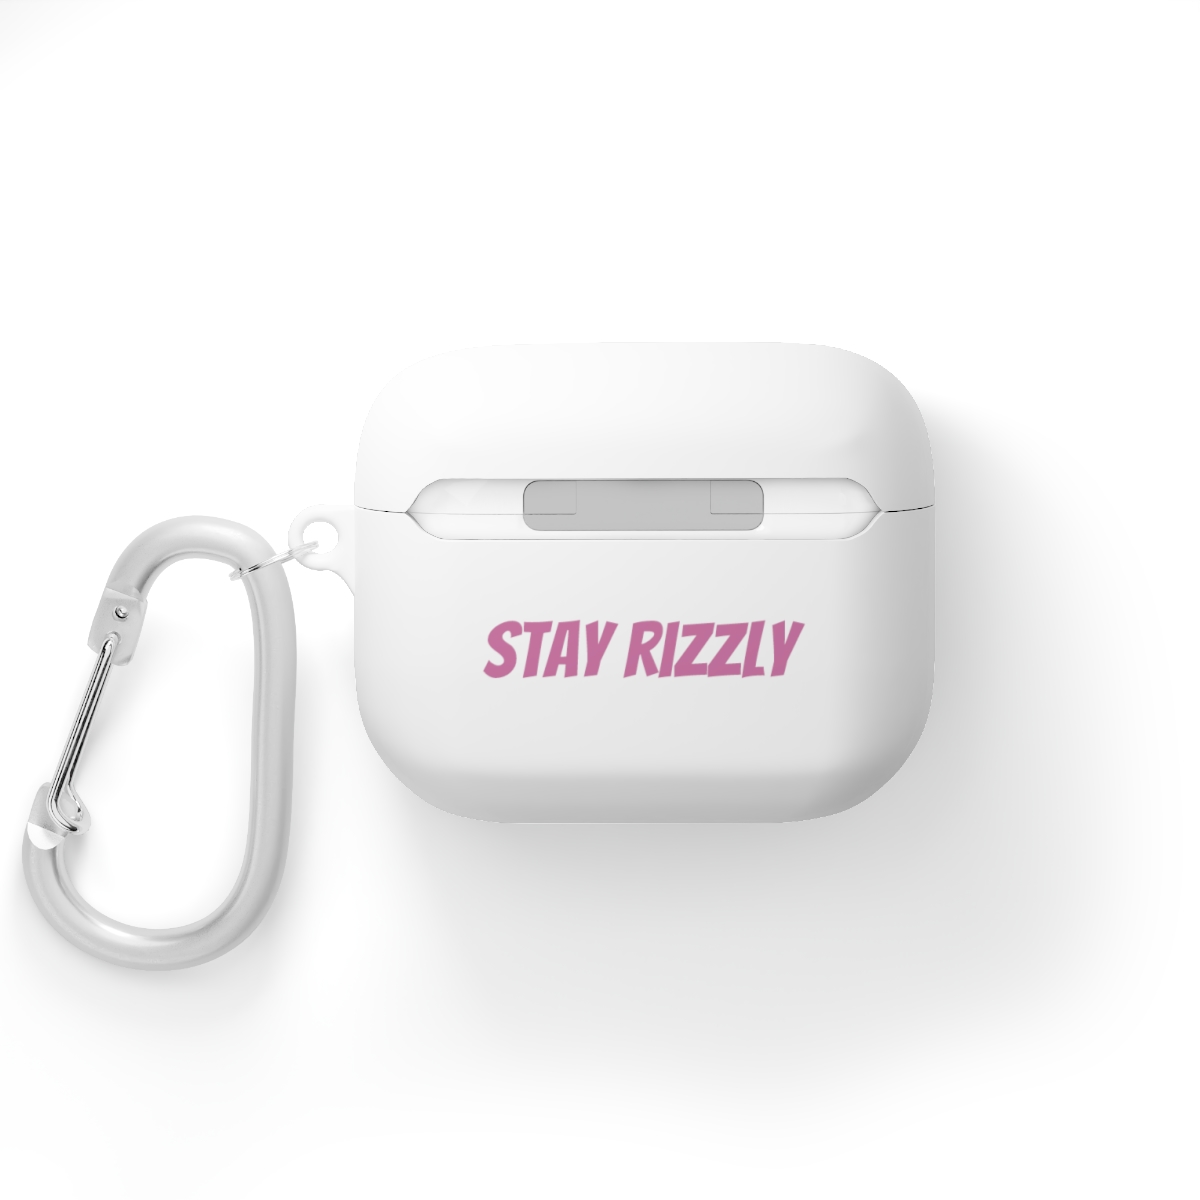 Official Bob the Dog airpods case product thumbnail image